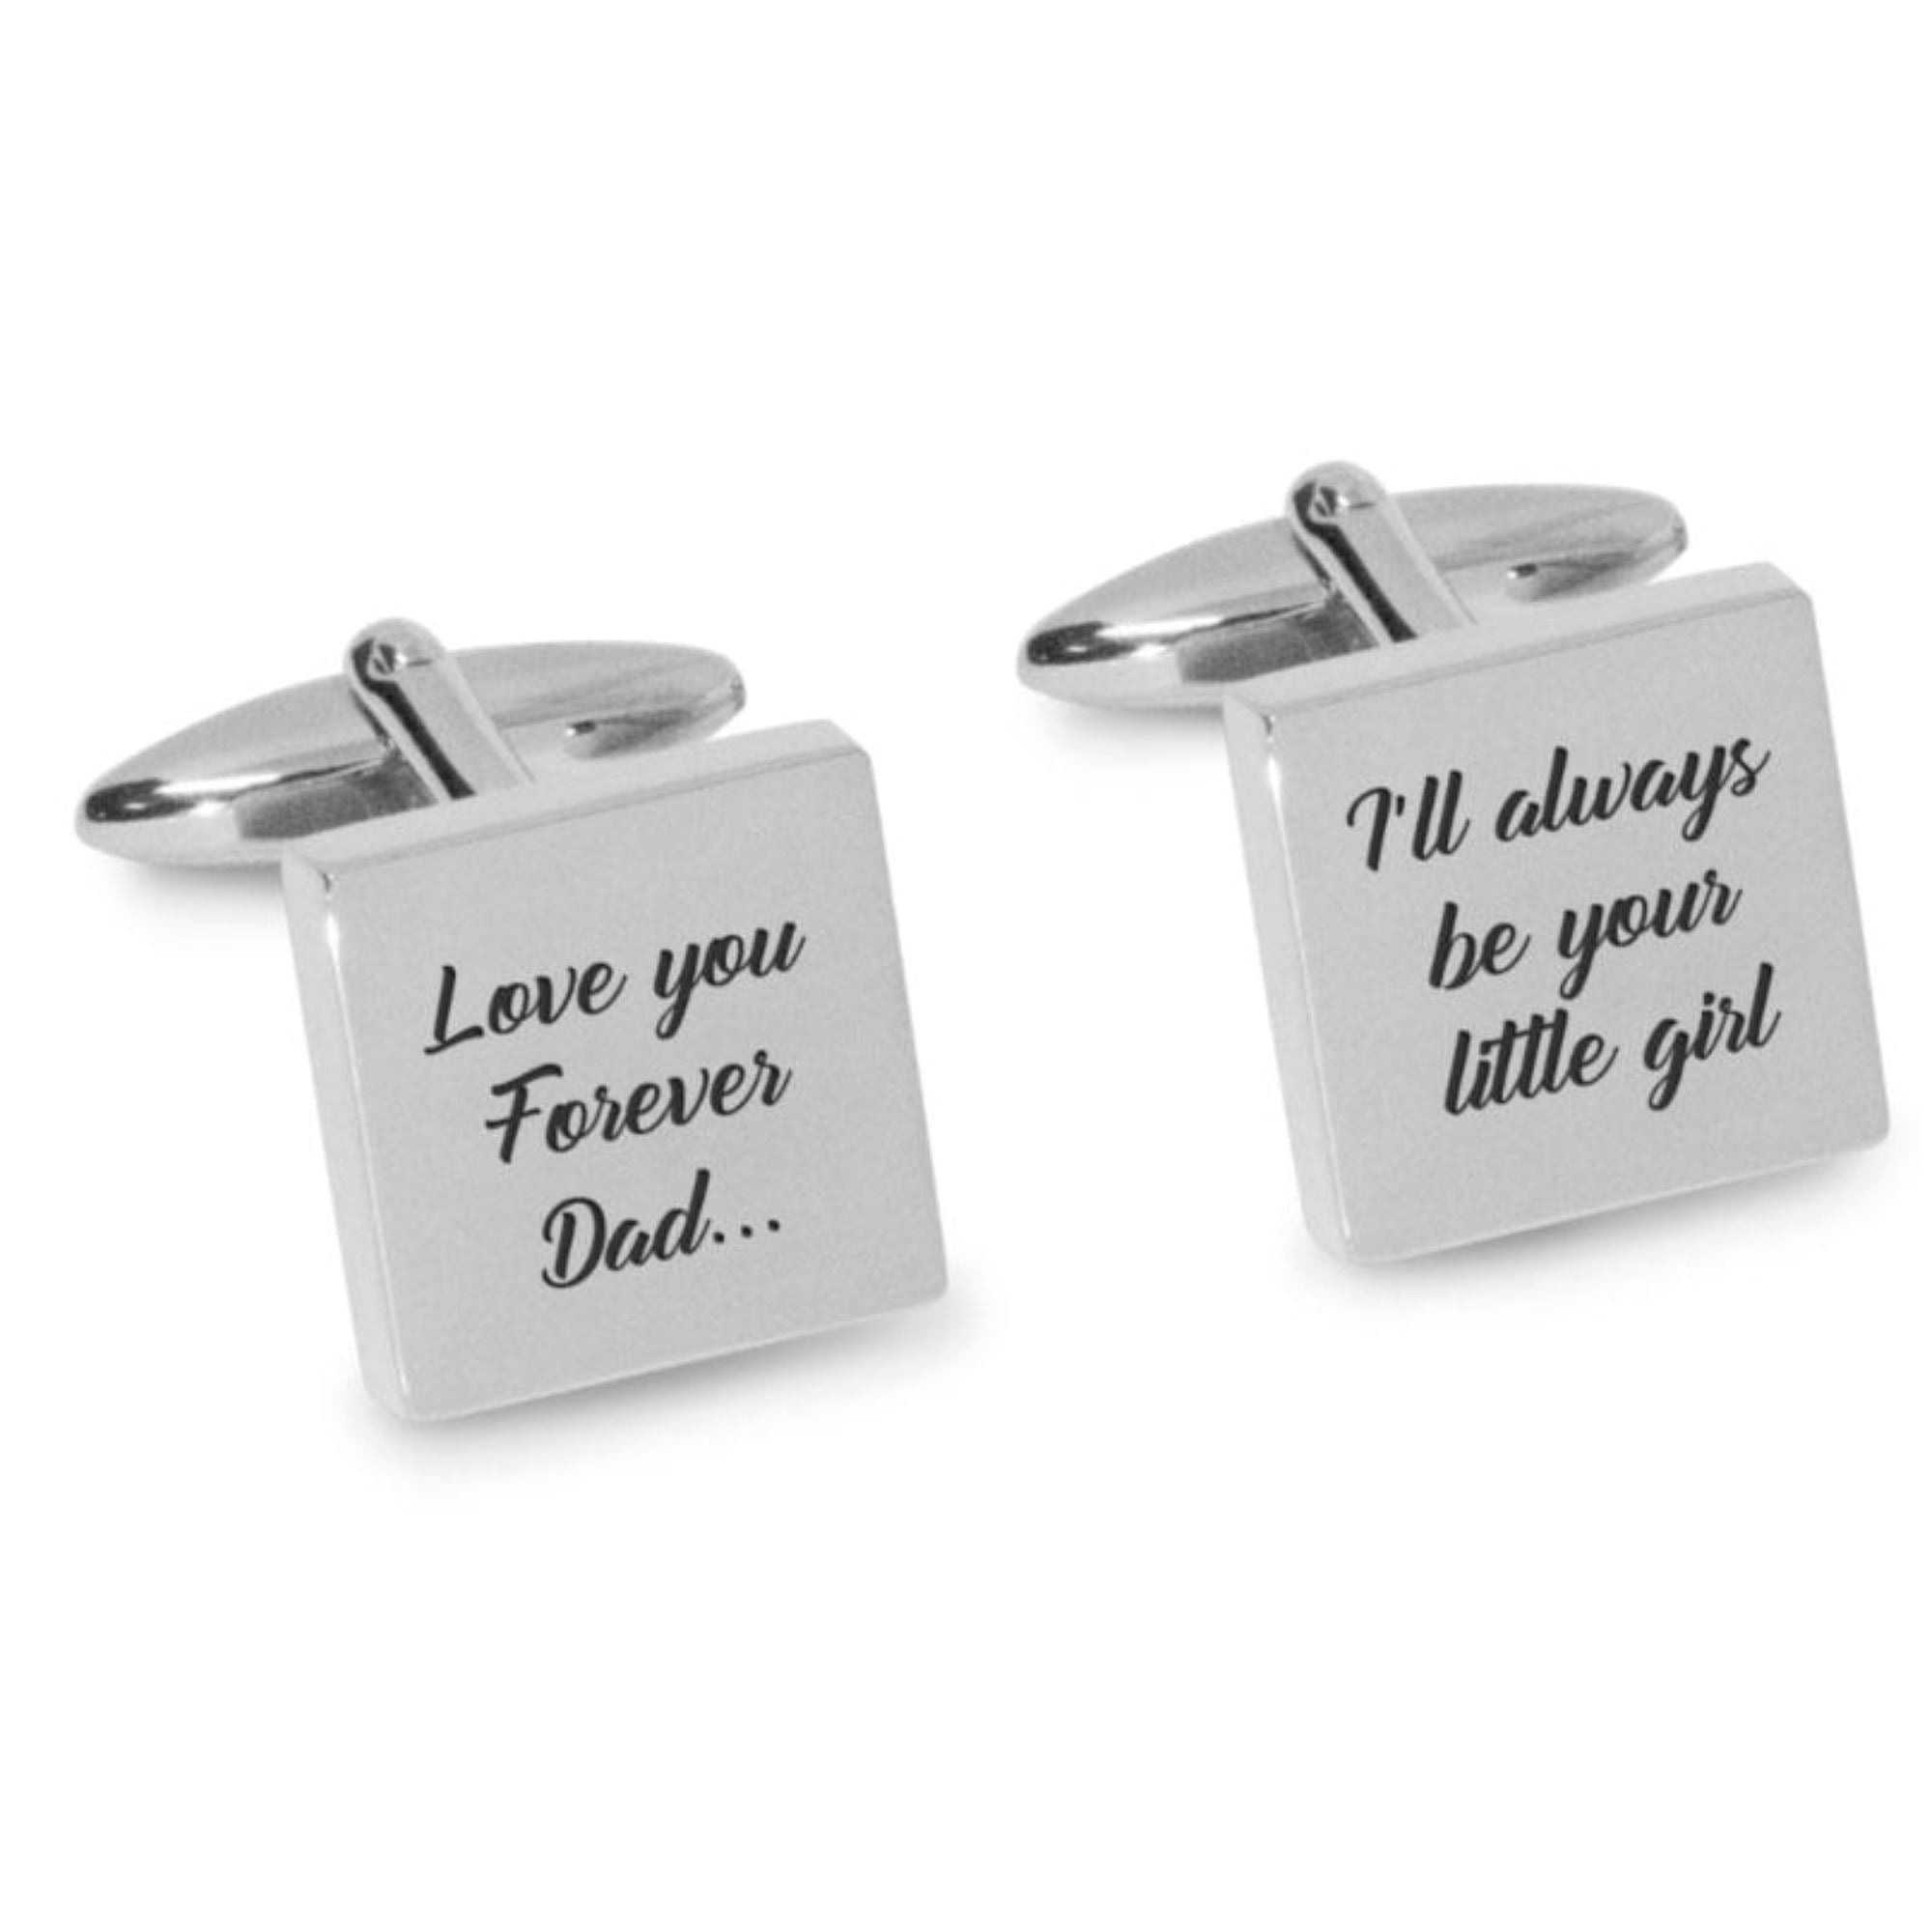 Love You Forever Dad I’ll Always Be Your Little Girl Cufflinks Engraving Cufflinks Clinks Australia 